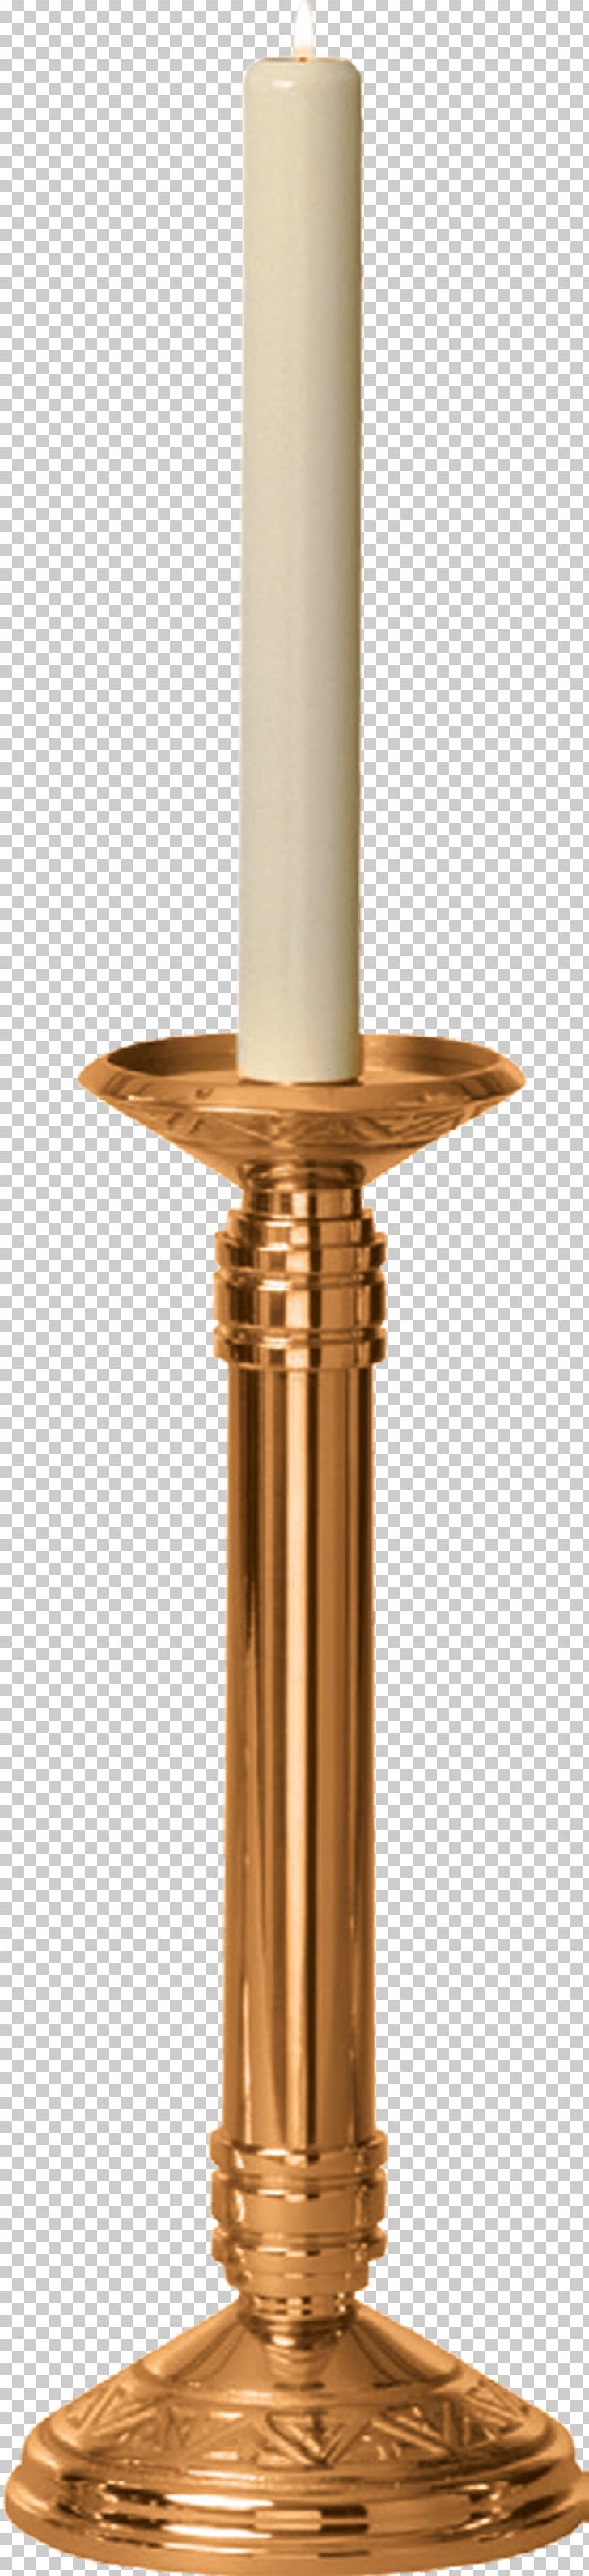 Candlestick Altar In The Catholic Church Altar Candle PNG, Clipart, Altar, Altar Candle, Altar Candlestick, Altar In The Catholic Church, Brass Free PNG Download